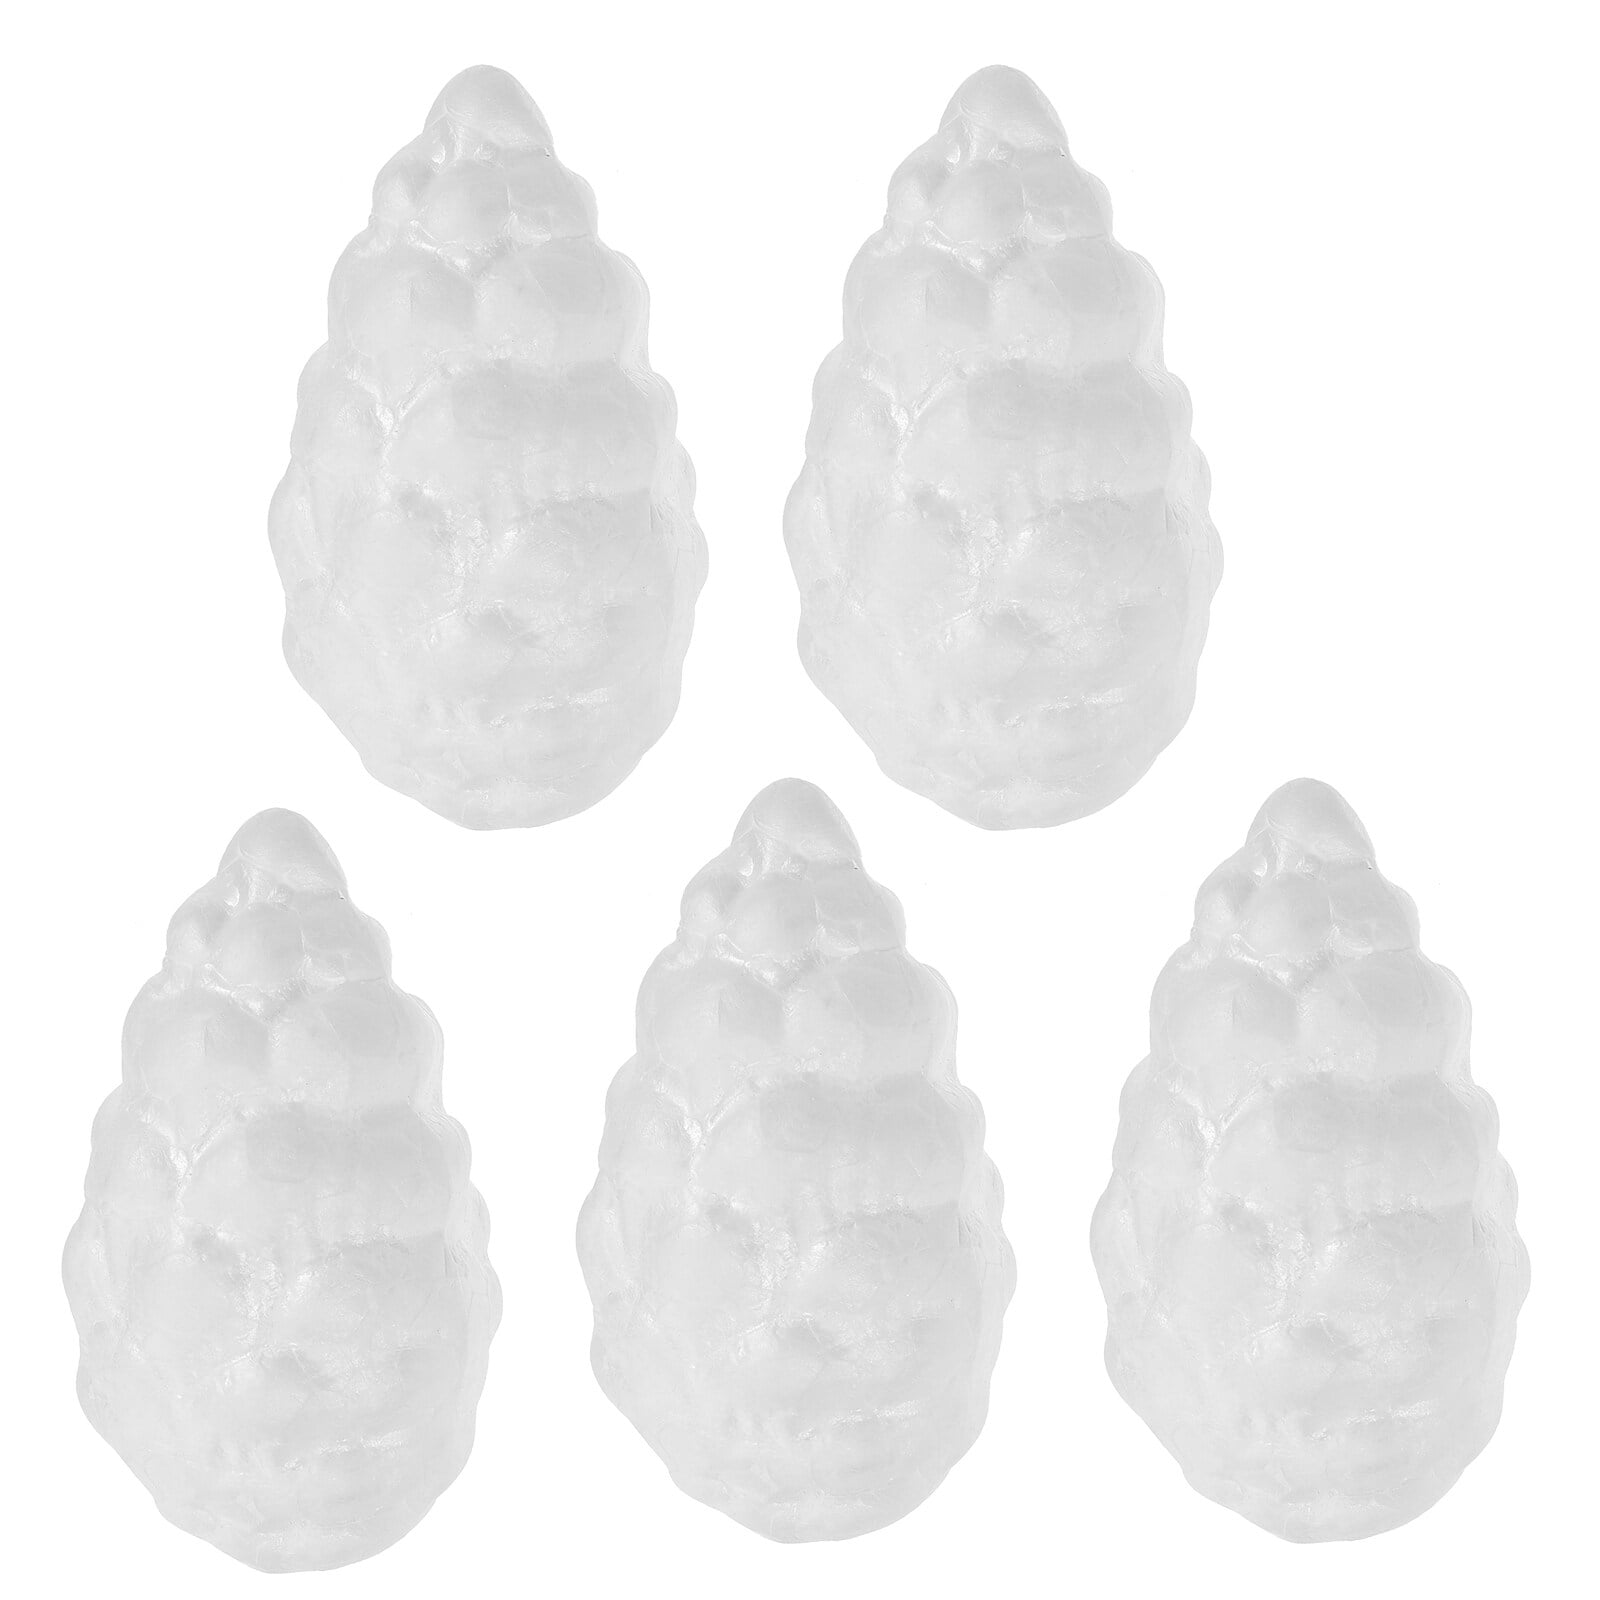 Brand: CraftyShapes, Type: Foam Cone, Specs: White, Smooth, Keywords:  Christmas, DIY Crafts, Floral Modeling, Key Points: Party Decoration,  Polystryene Material, Main Features: Conical Shape, Versatile Use